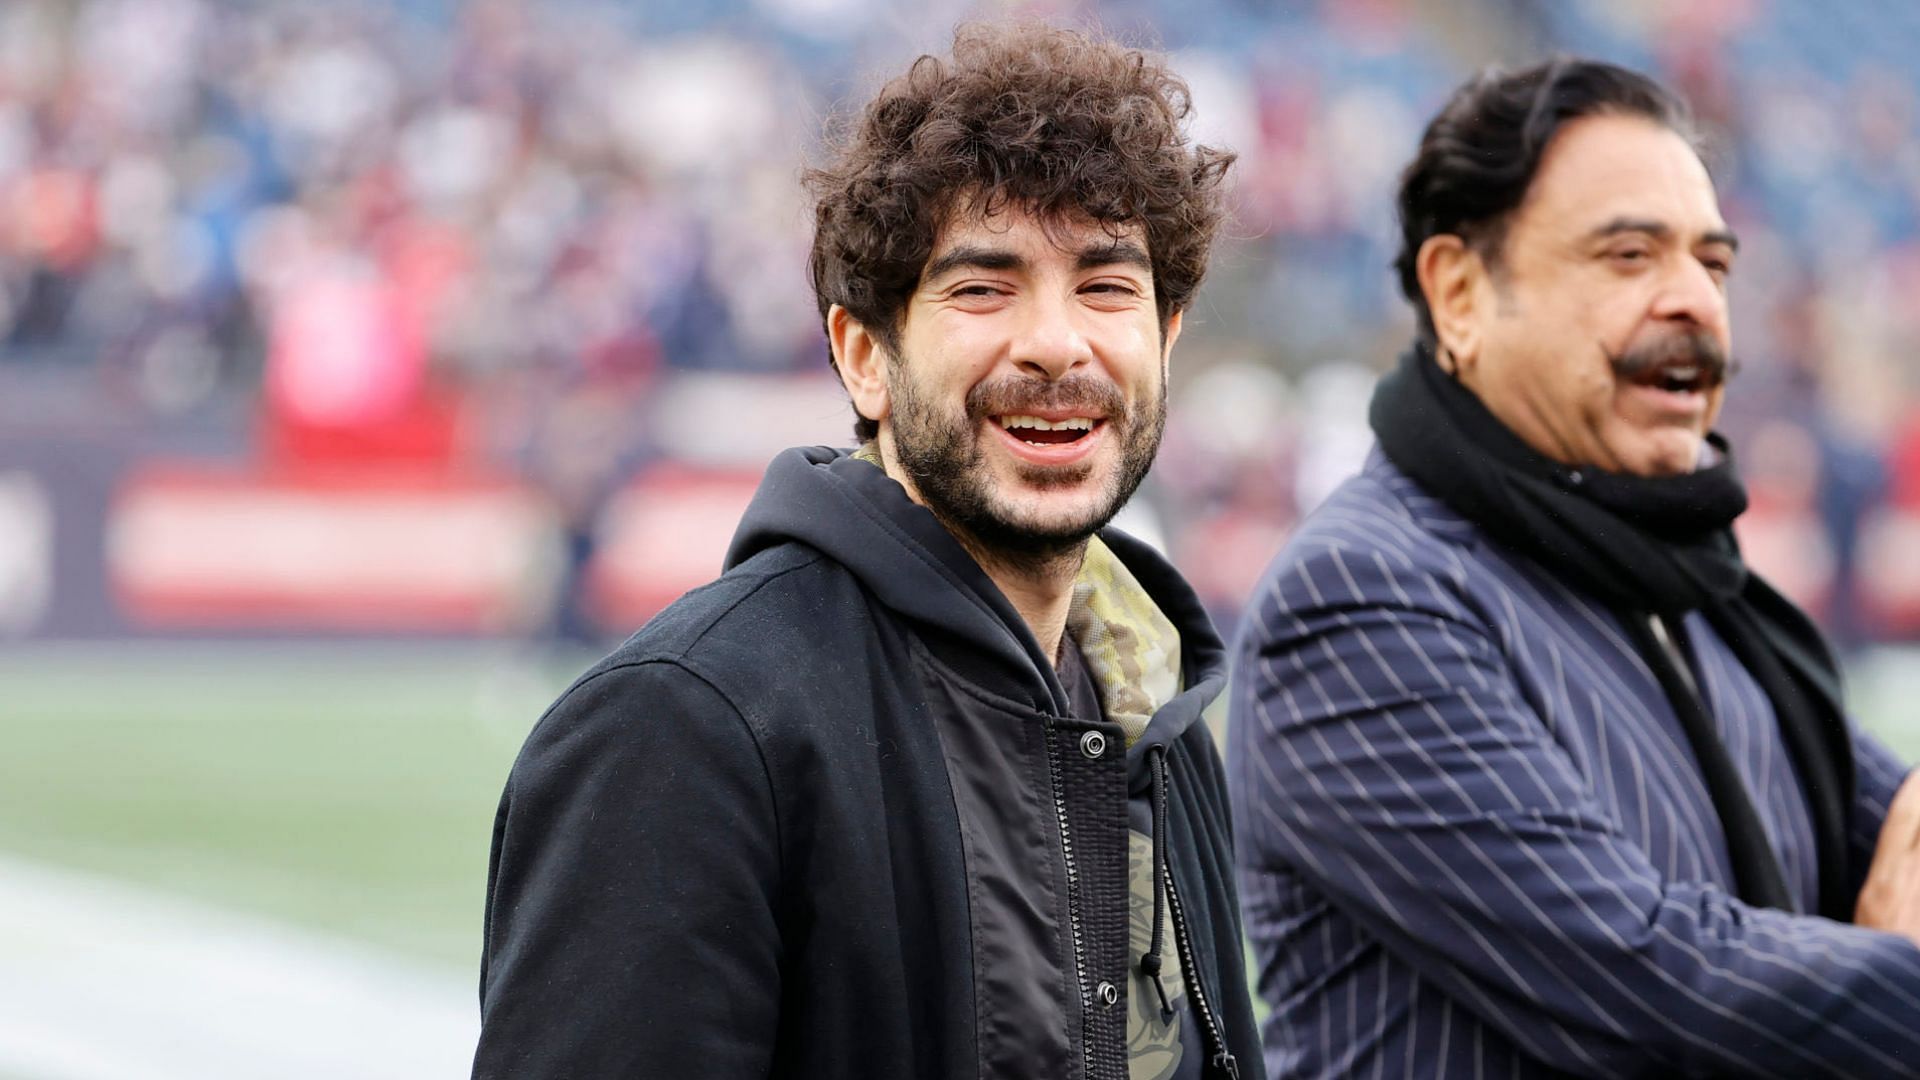 Tony Khan with his dad at Jacksonville Jaguars game